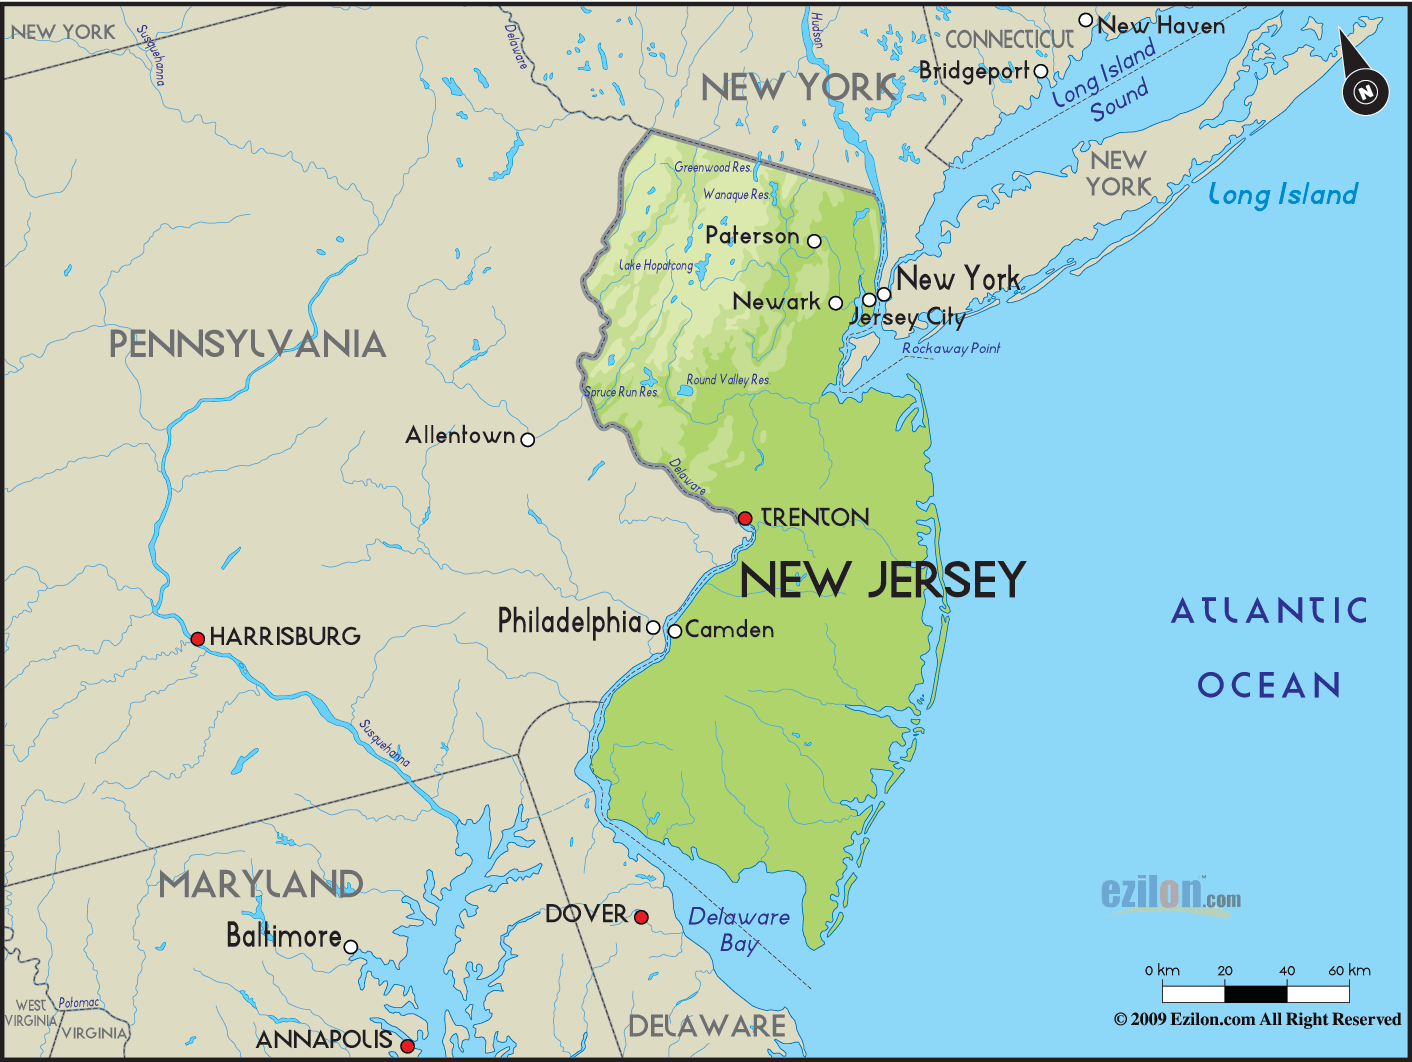 new york state and new jersey map Geographical Map Of New Jersey And New Jersey Geographical Maps new york state and new jersey map